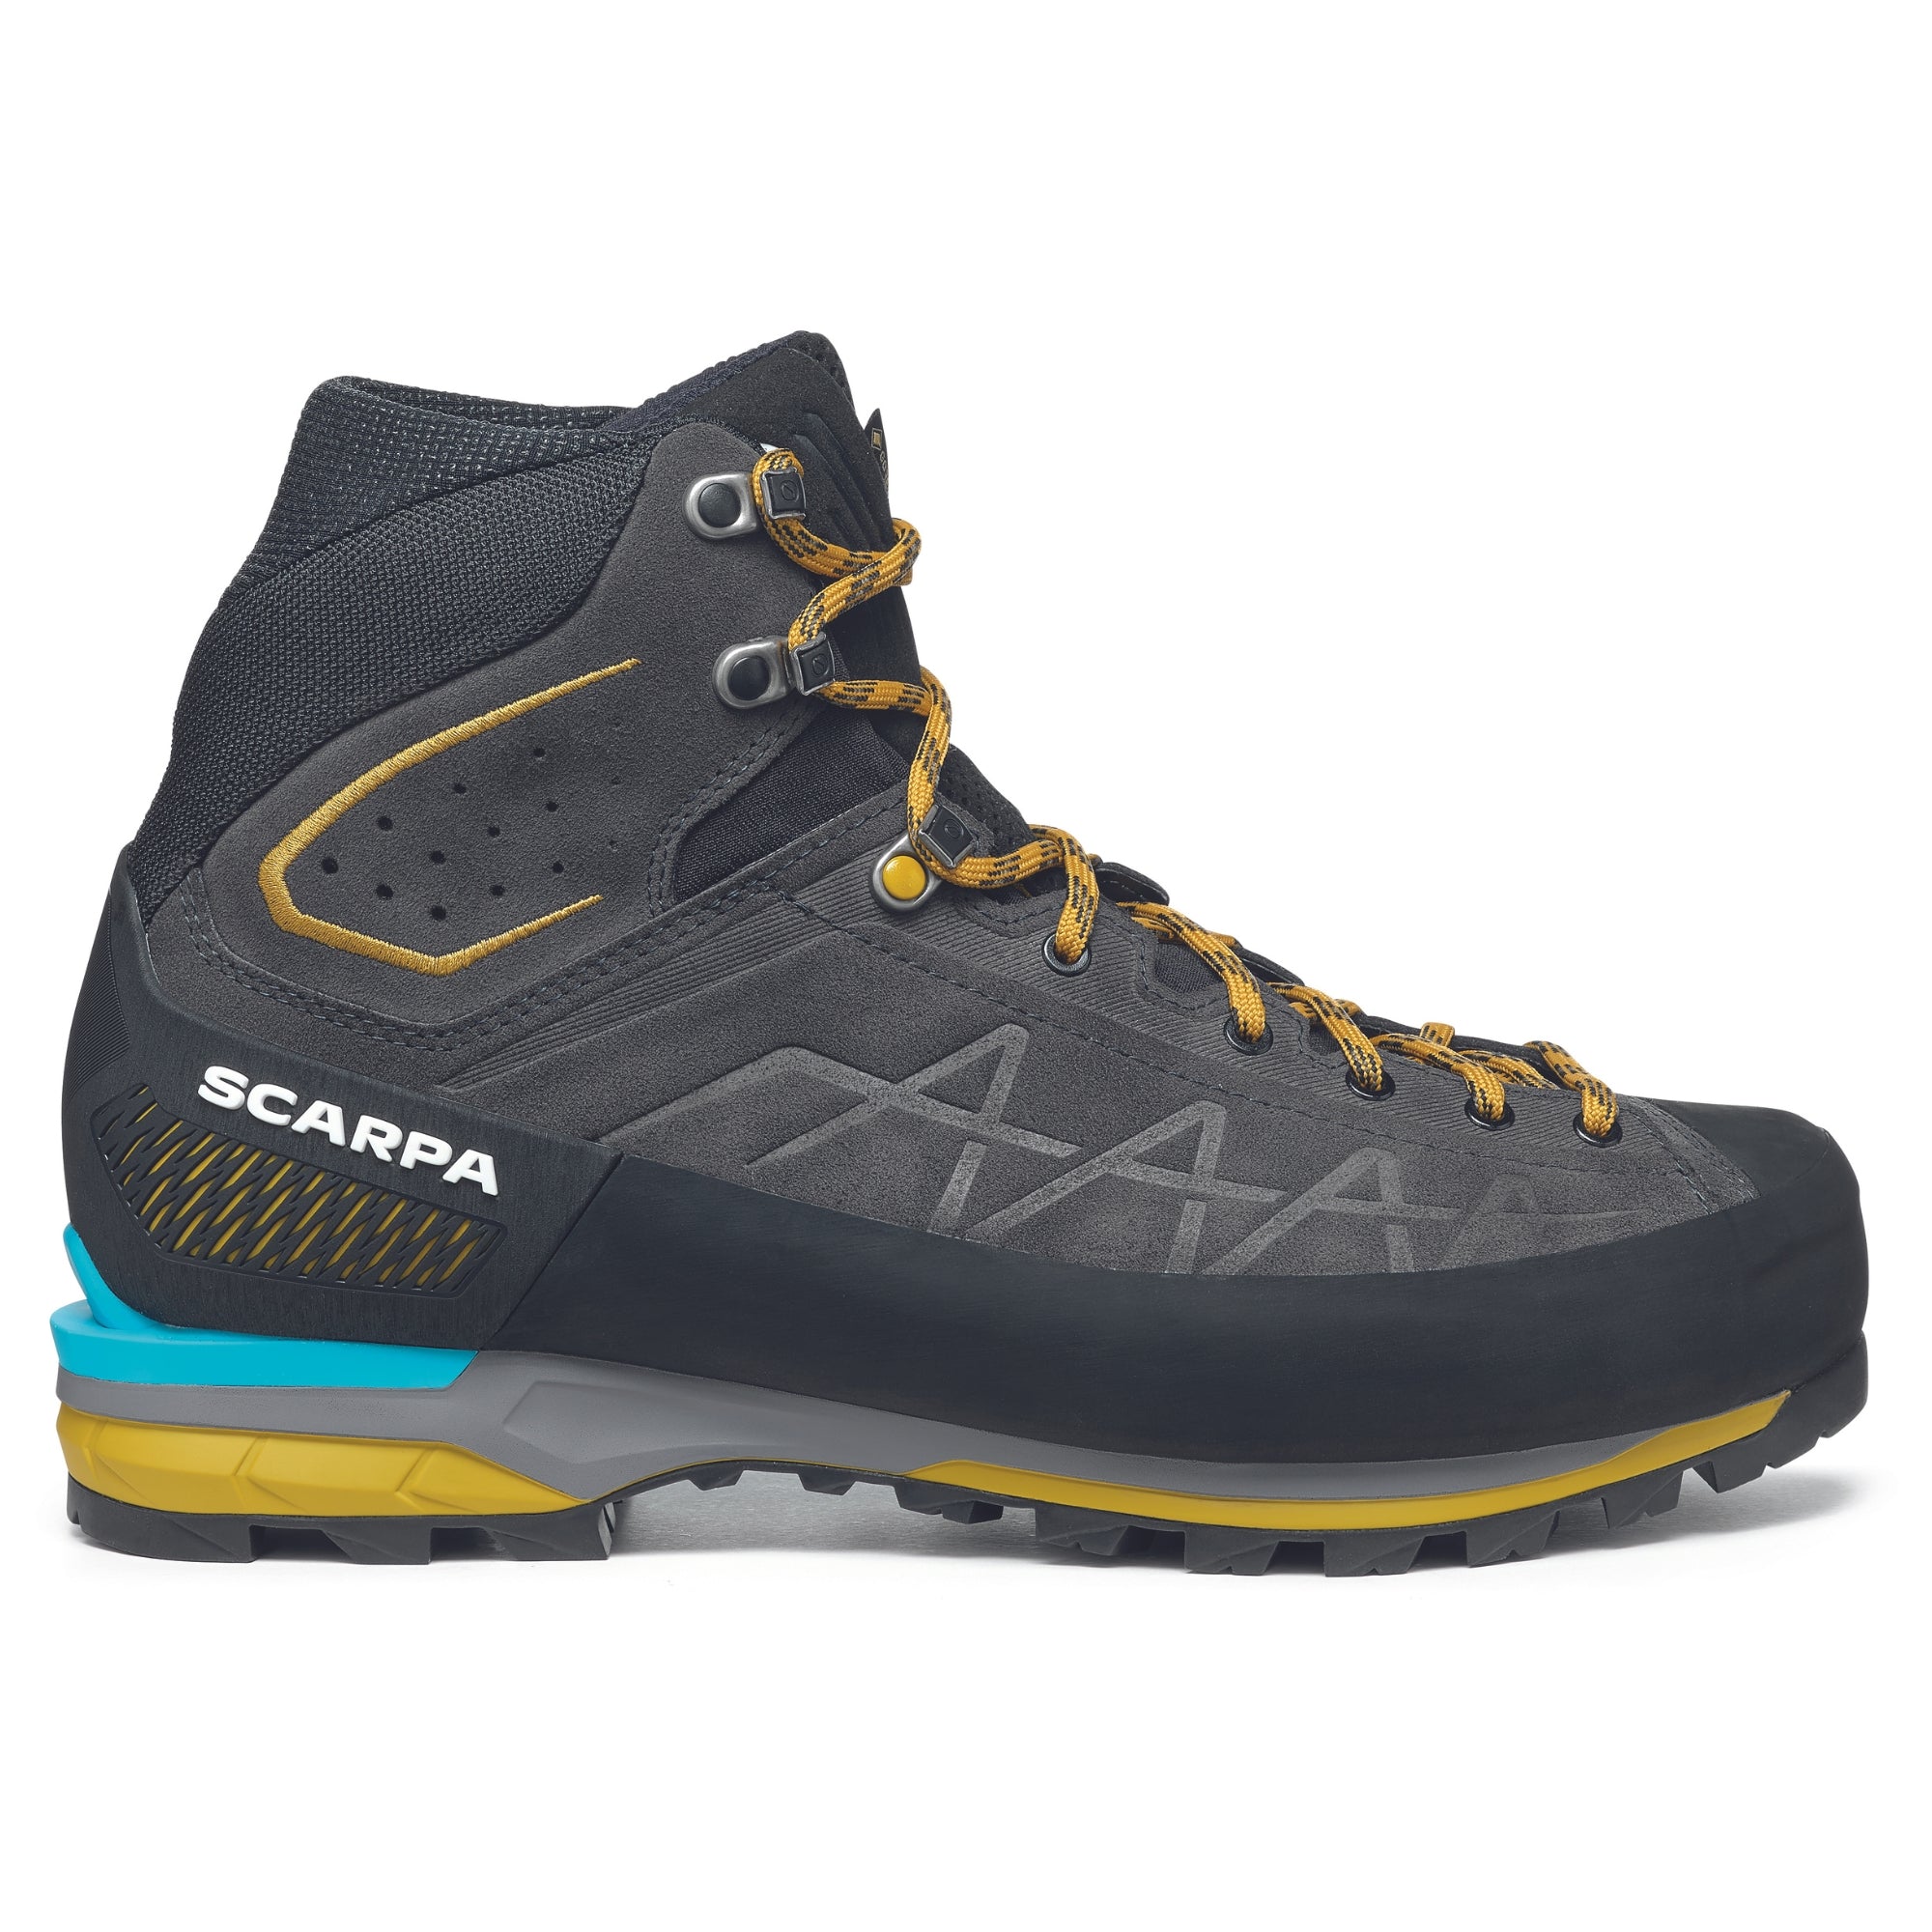 Scarpa Zodiac Tech GTX mens boots in anthracite sulphur colour. Showing side on view.